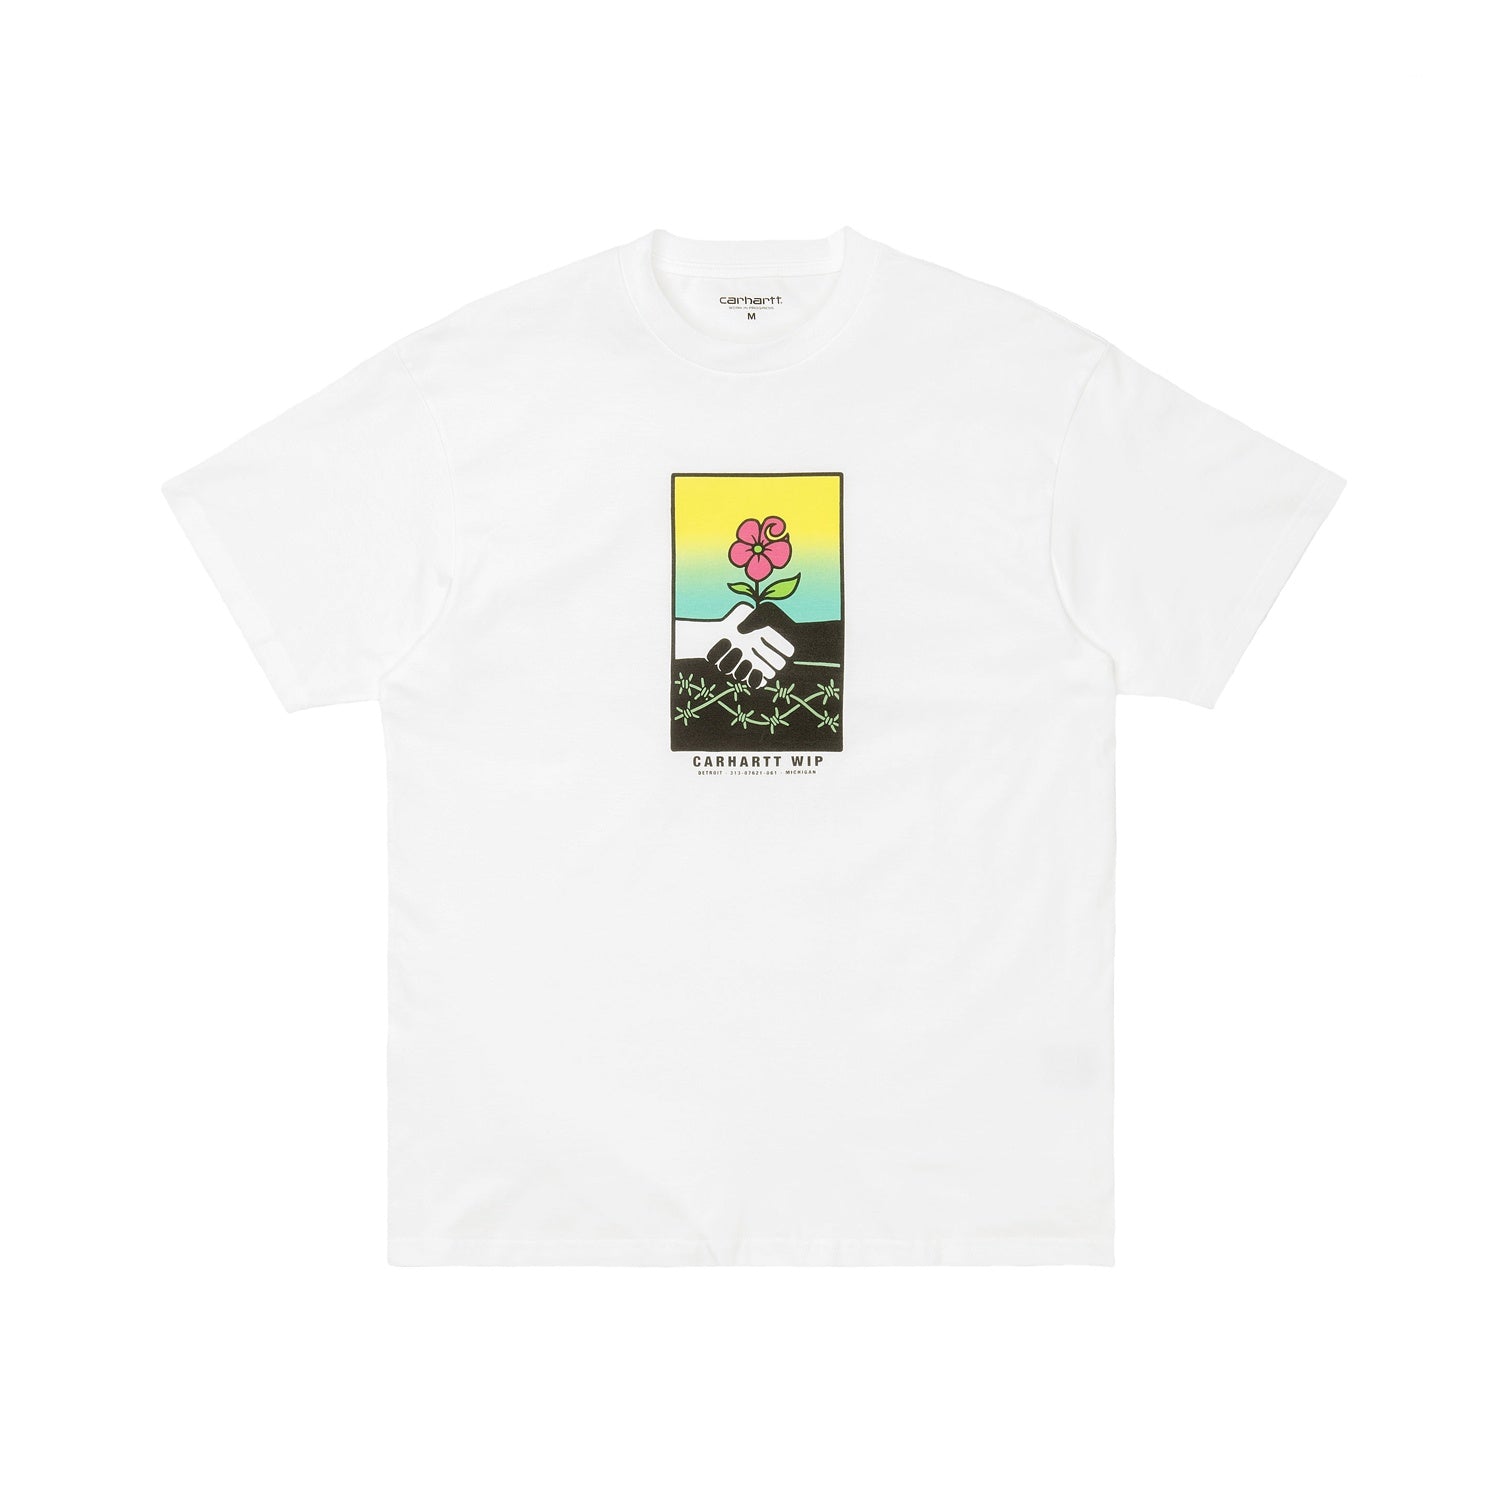 Carhartt WIP S/S Together T-Shirt Organic Cotton White